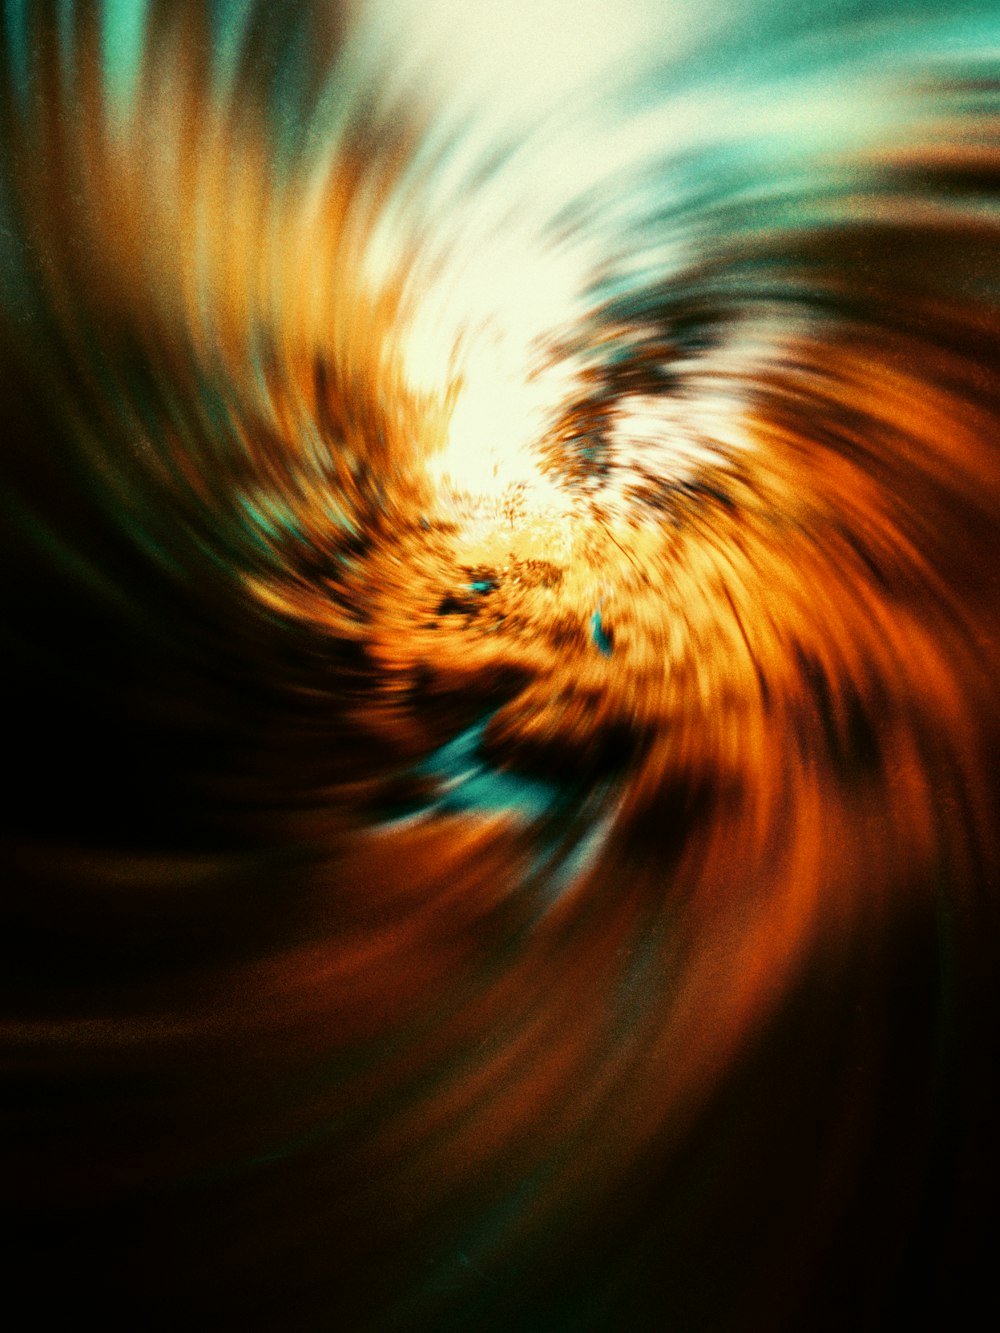 a blurry image of a swirl in orange and blue